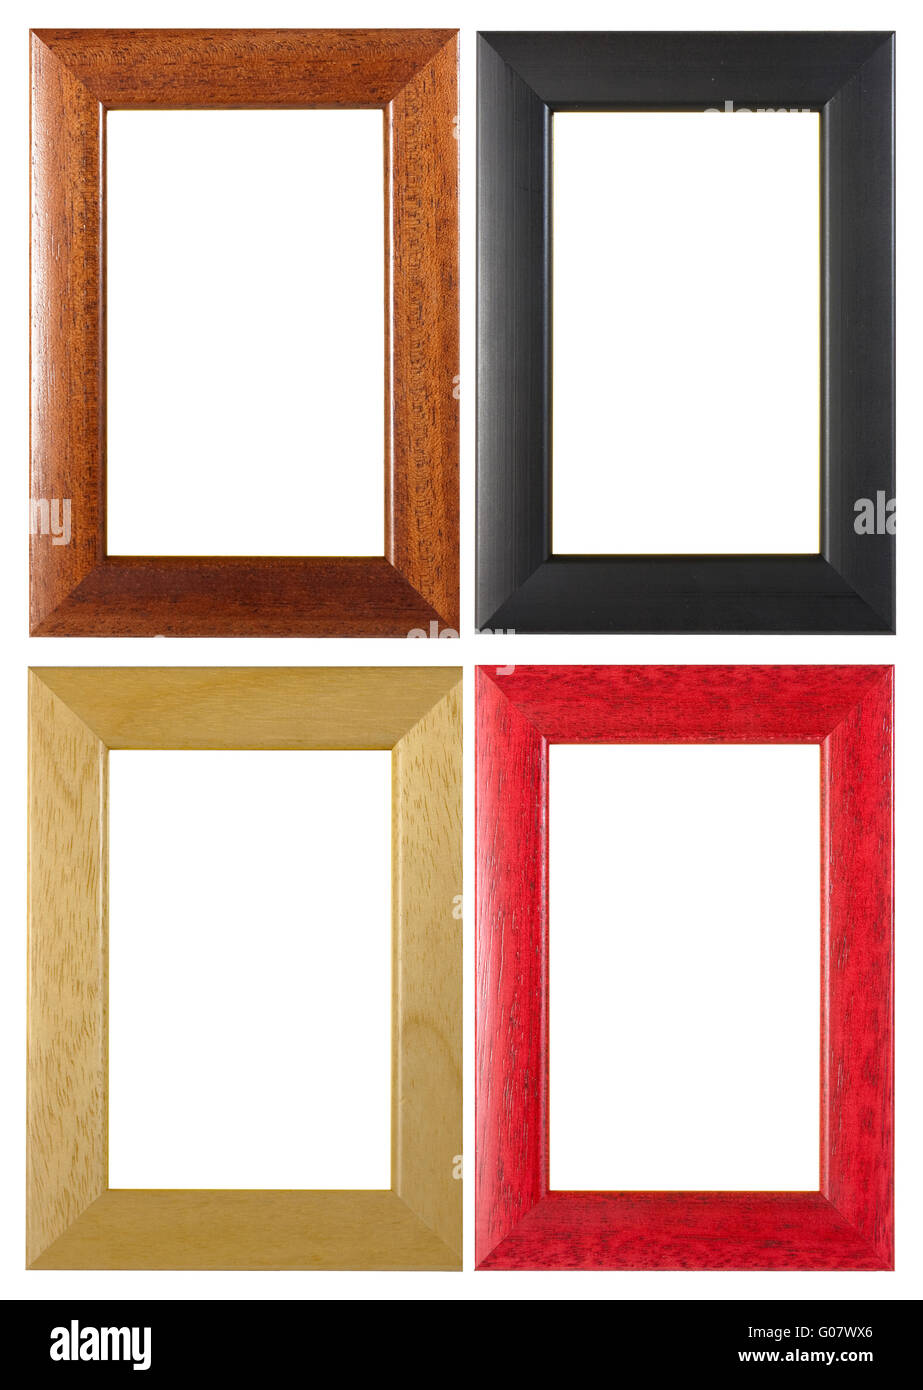 Picture Frames Collection Stock Photo Alamy